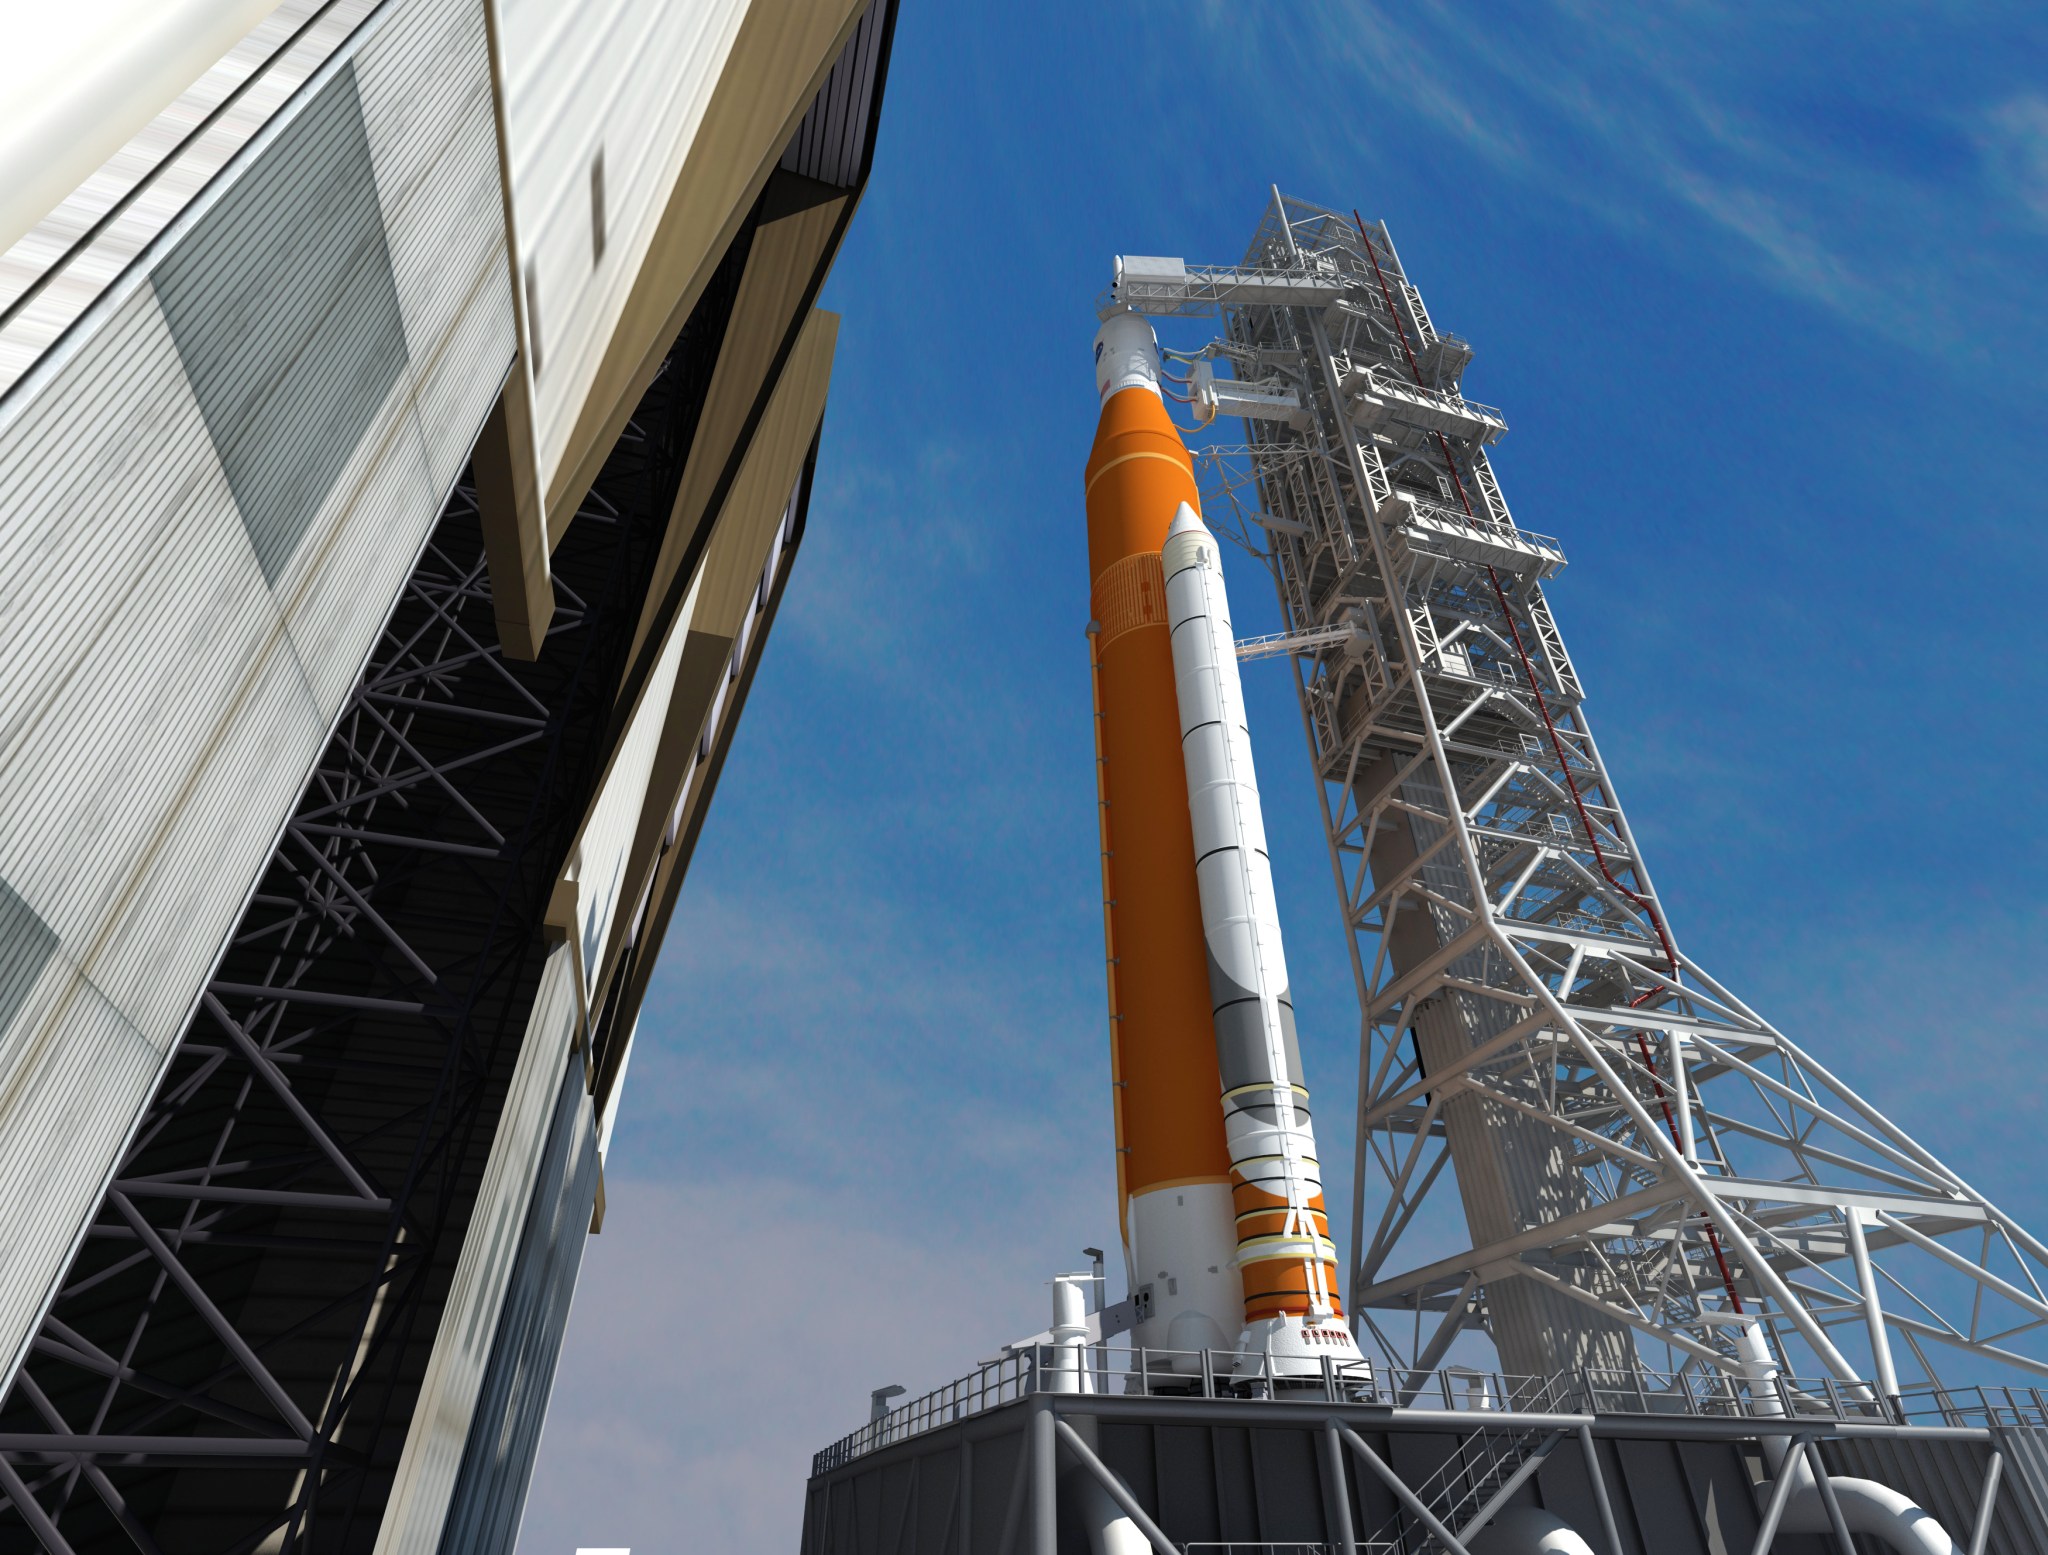 Space Launch System Rolls Out of the Vehicle Assembly Building